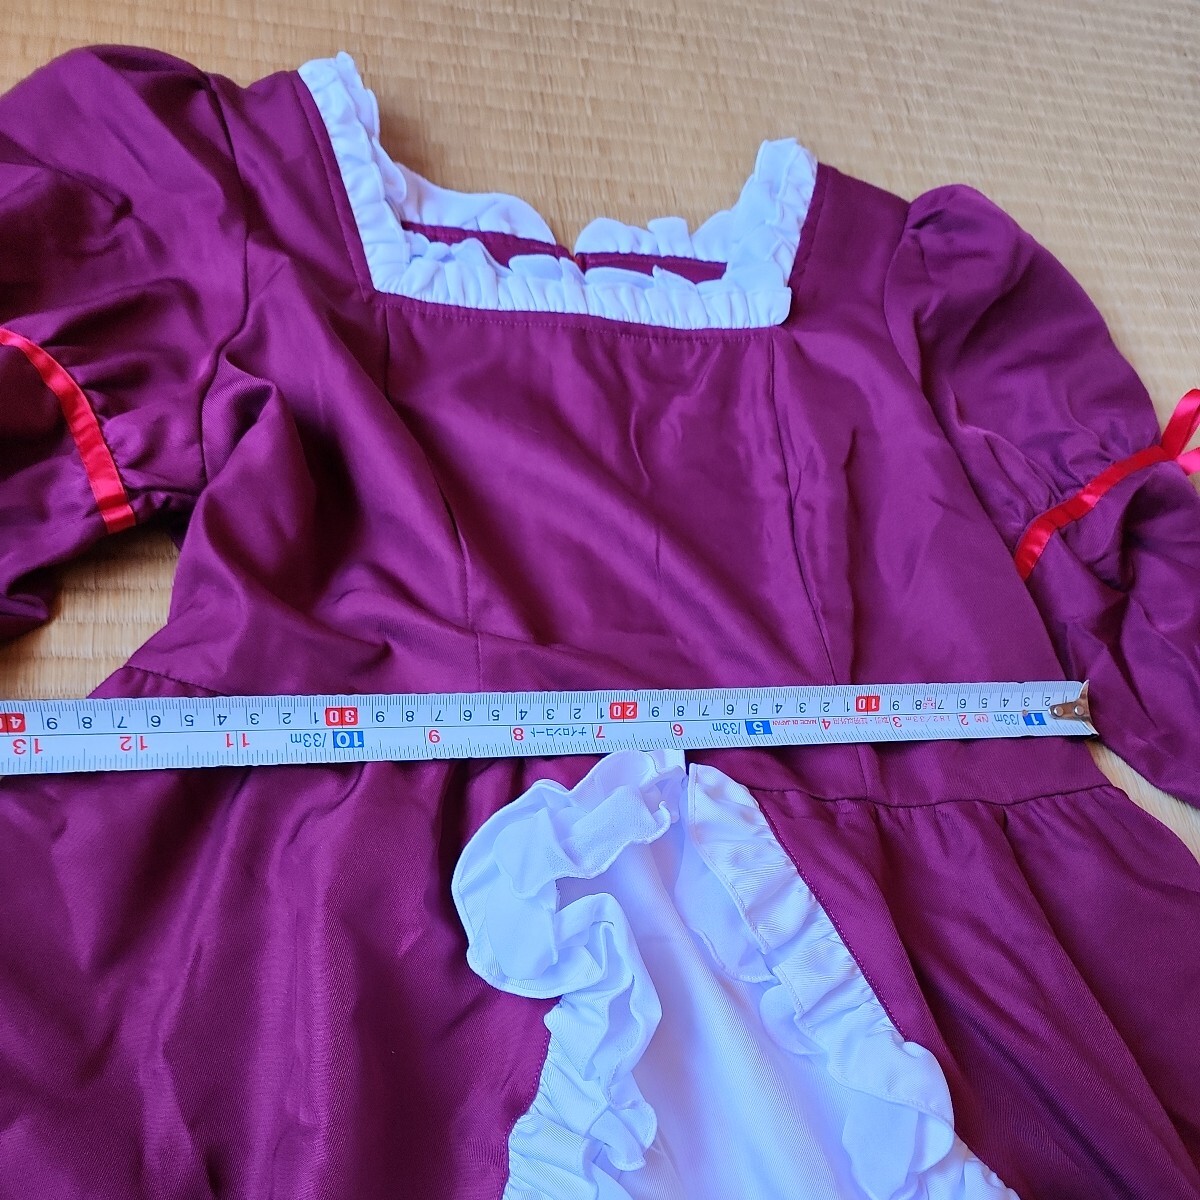 . is ... little small dove M size same etc. one jpy start cosplay .. white . wine red One-piece skirt. .. is 2 sheets ... has been make 